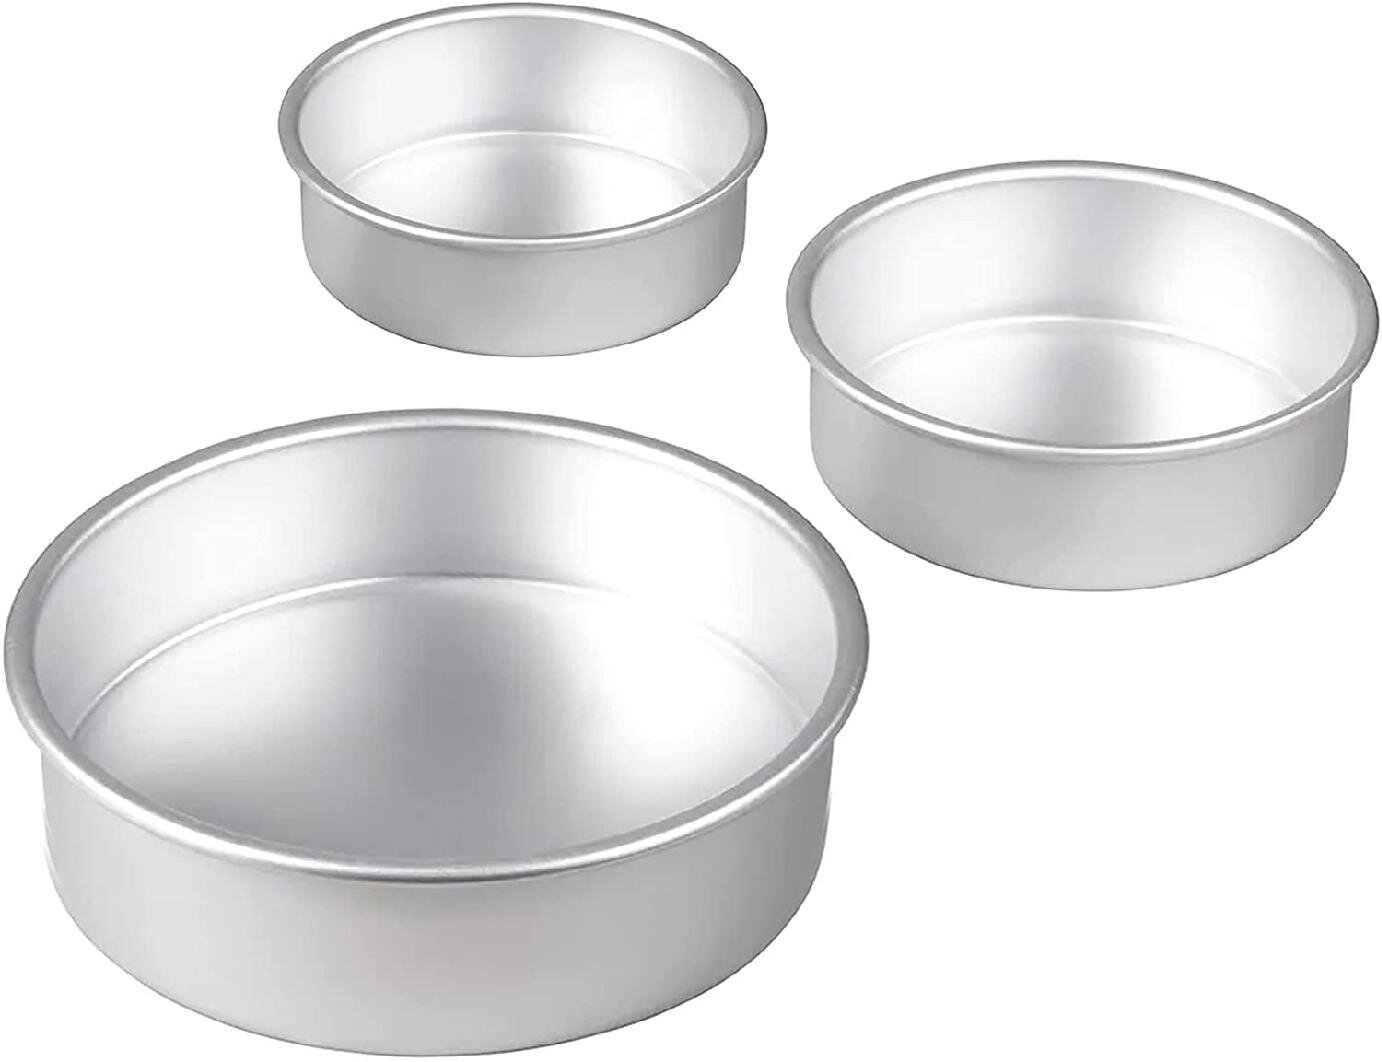 6 Pcs Durable Stainless Removable Bottom Cake Pan Non-Stick Baking Mold 